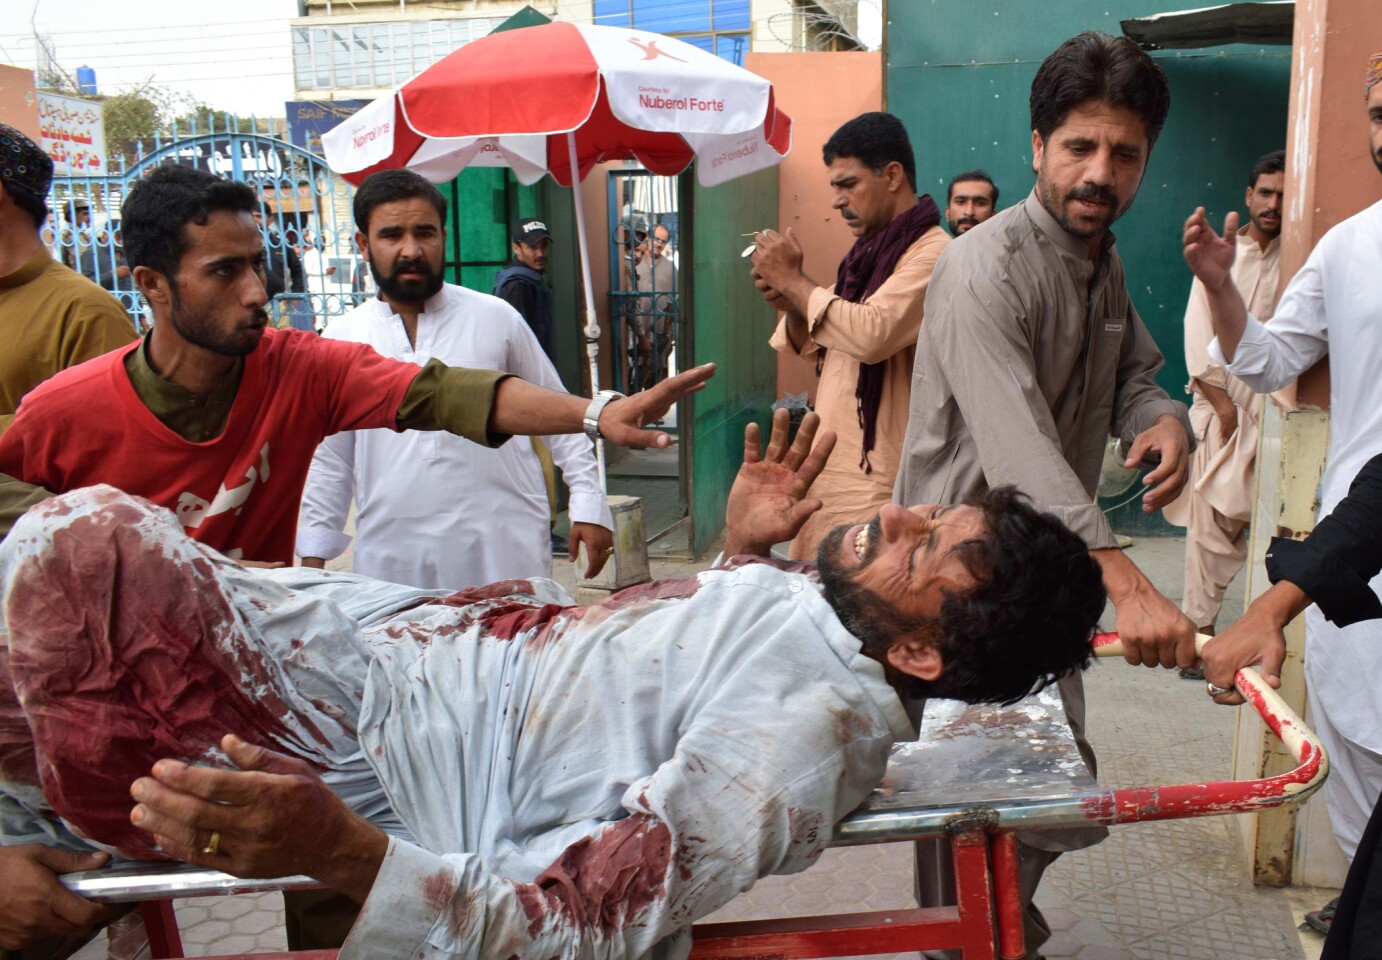 A man hurt in a suicide bombing is taken to a hospital in Quetta on July 13, 2018 following a terror attack at an election rally.